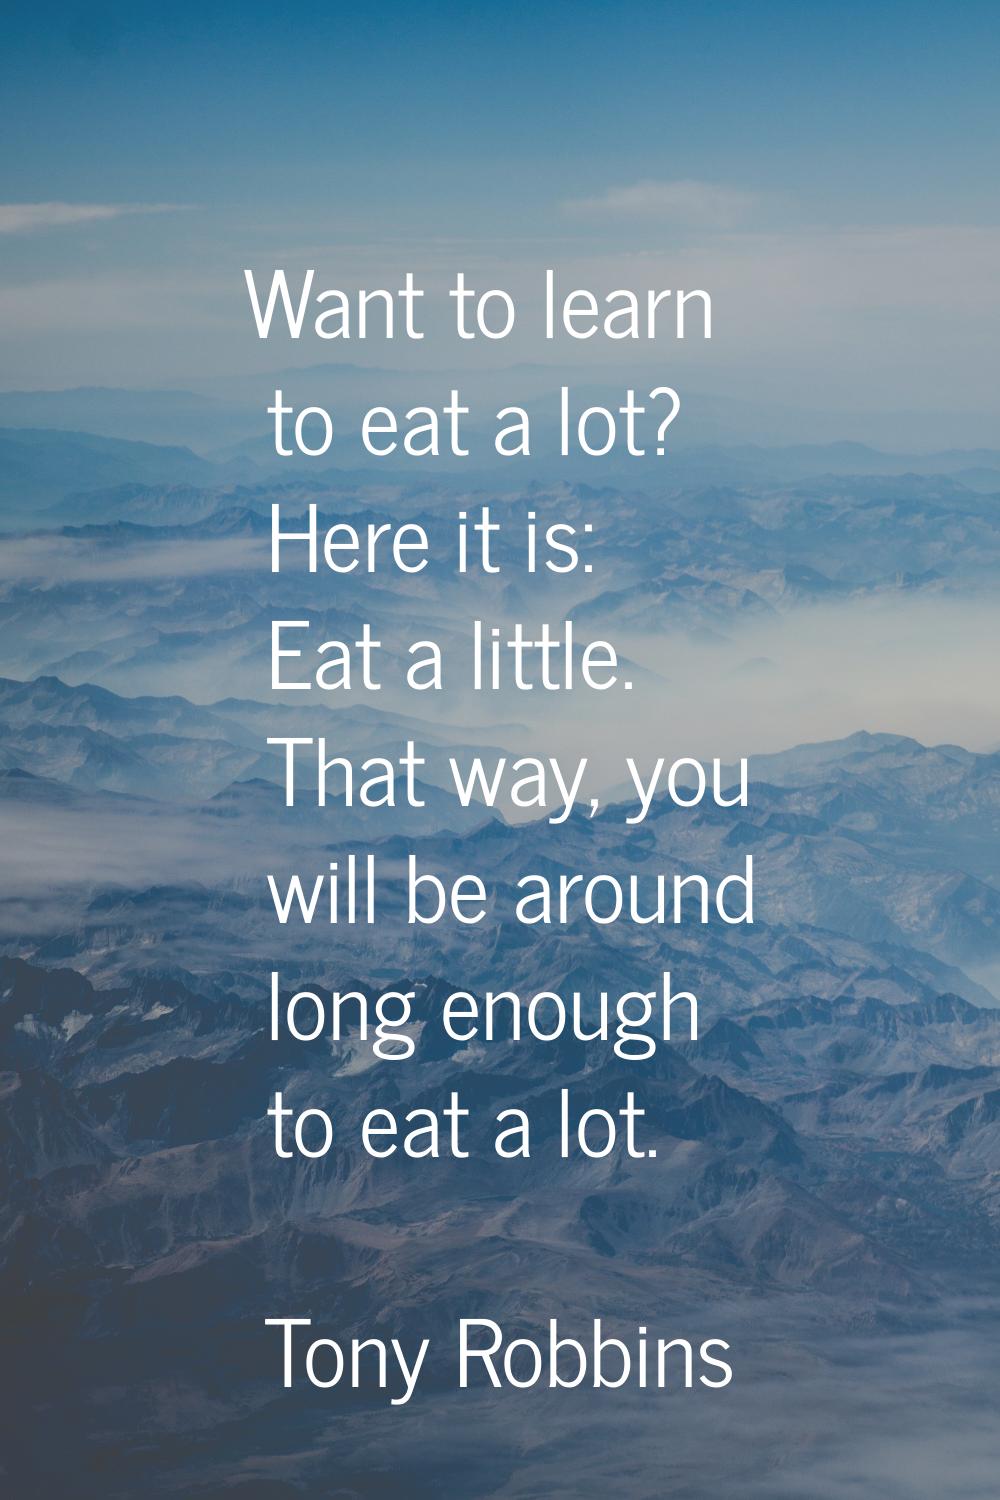 Want to learn to eat a lot? Here it is: Eat a little. That way, you will be around long enough to e